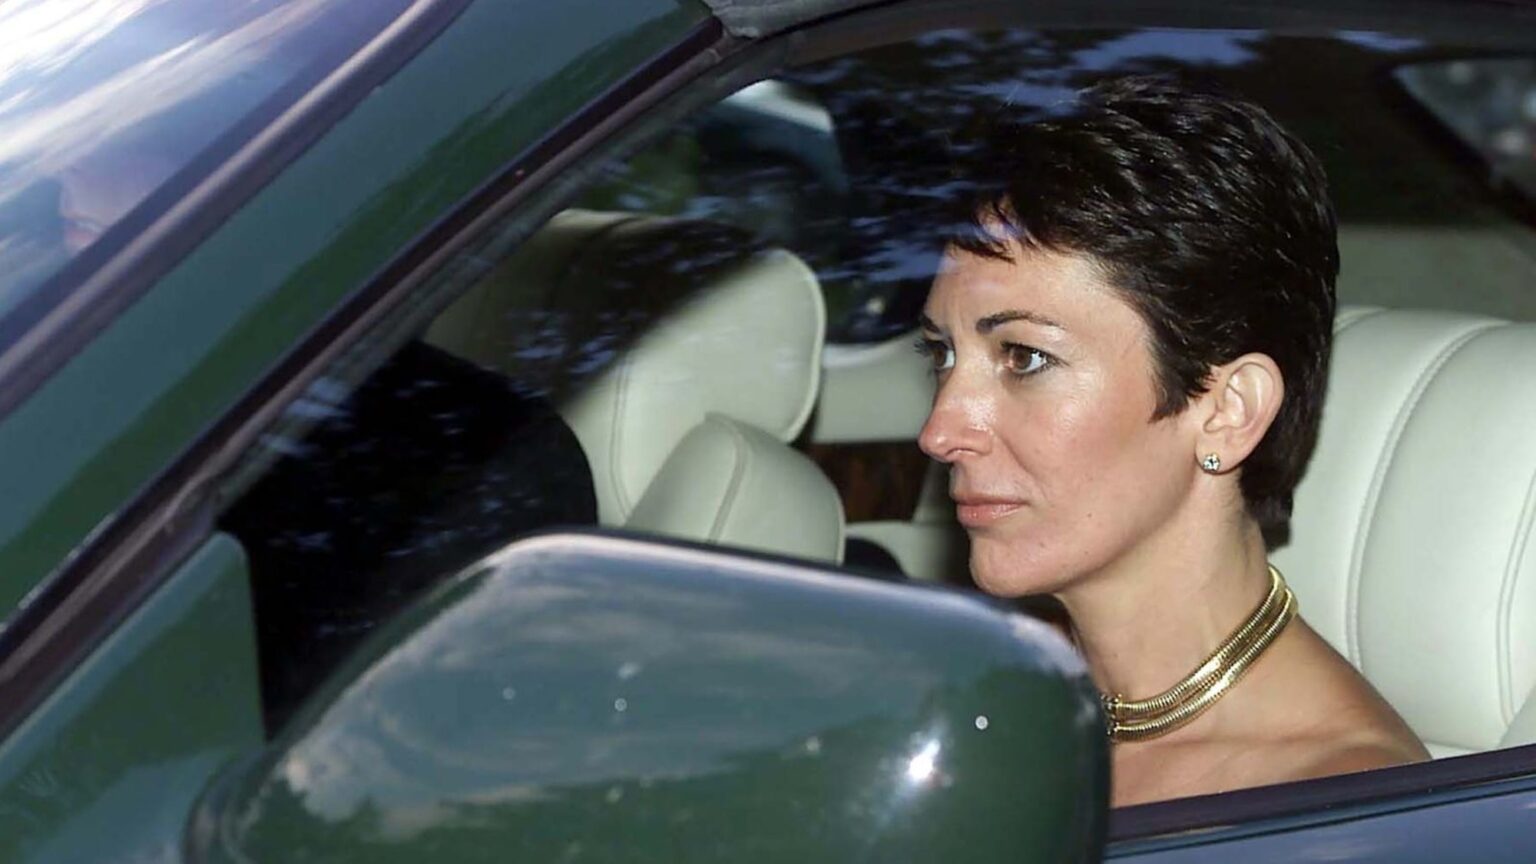 Ghislaine Maxwell was arrested in New Hampshire in July 2020. Was Maxwell married and is she now getting a divorce?